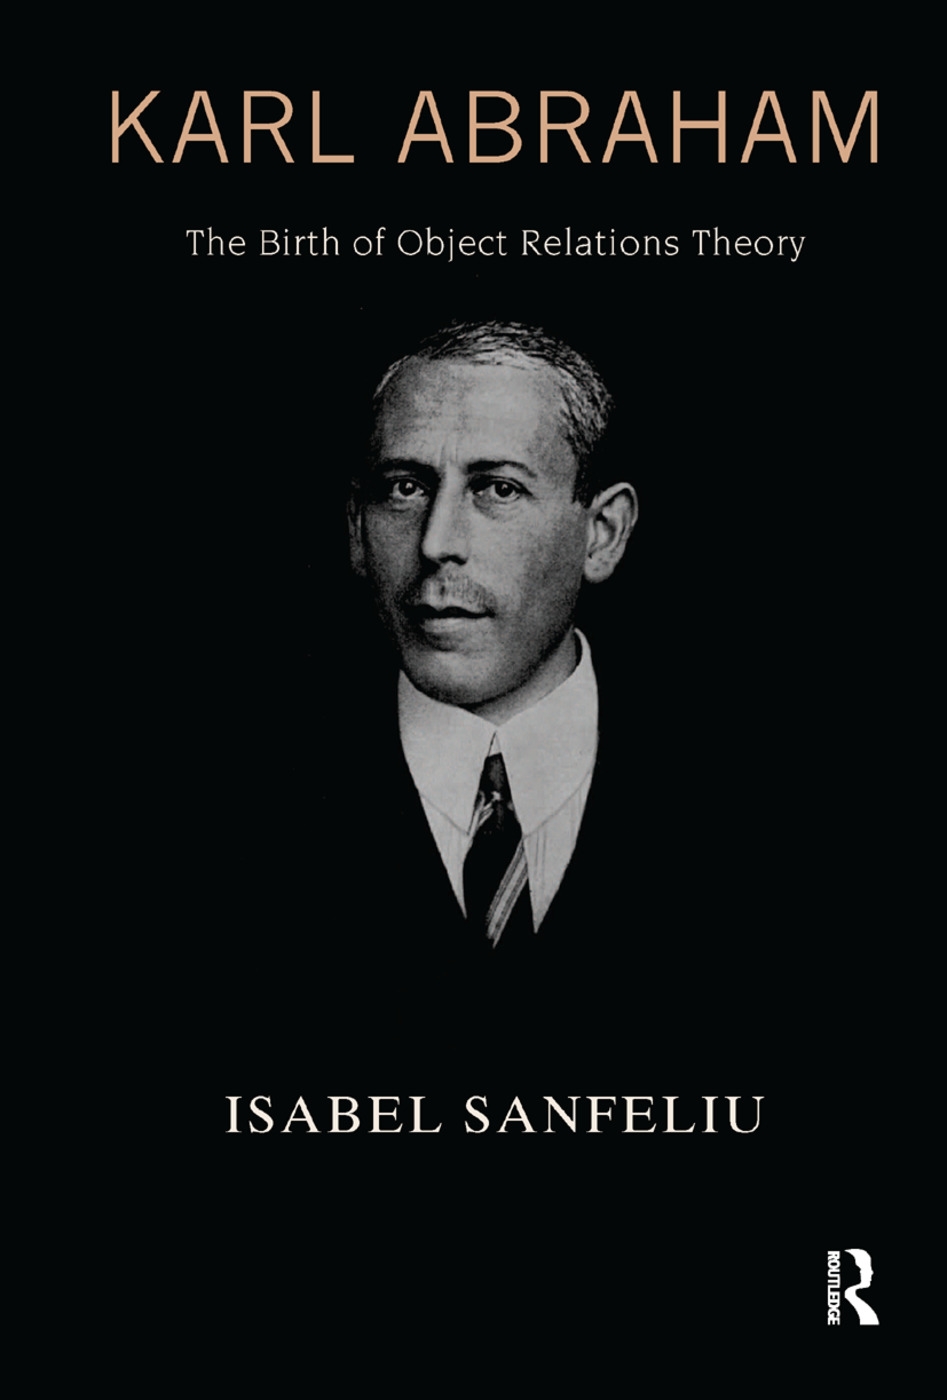 Karl Abraham: The Birth of Object Relations Theory